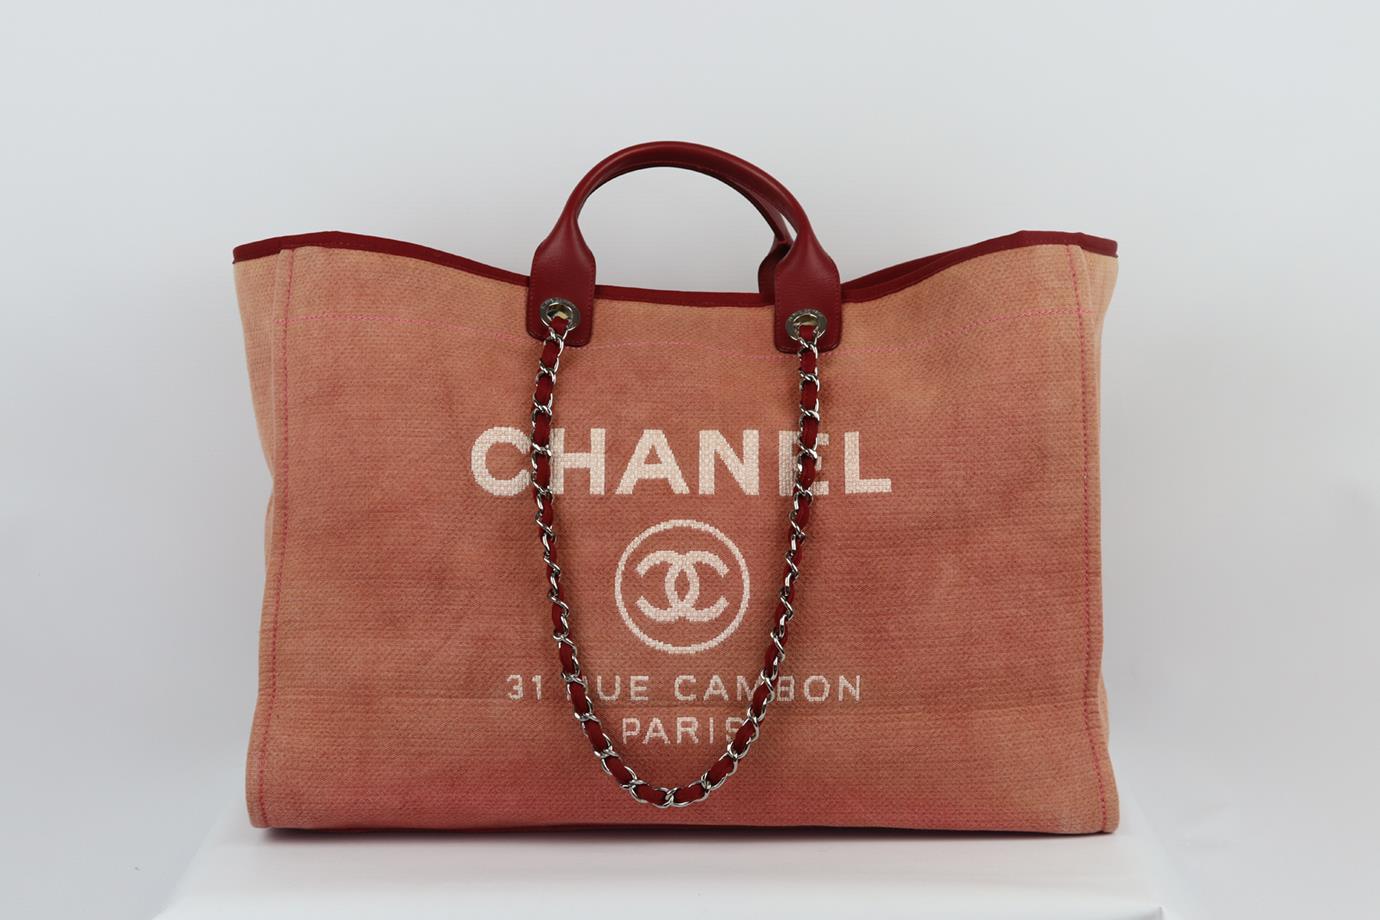 Chanel 2012 Deauville Extra Large Canvas And Leather Tote Bag In Excellent Condition For Sale In London, GB